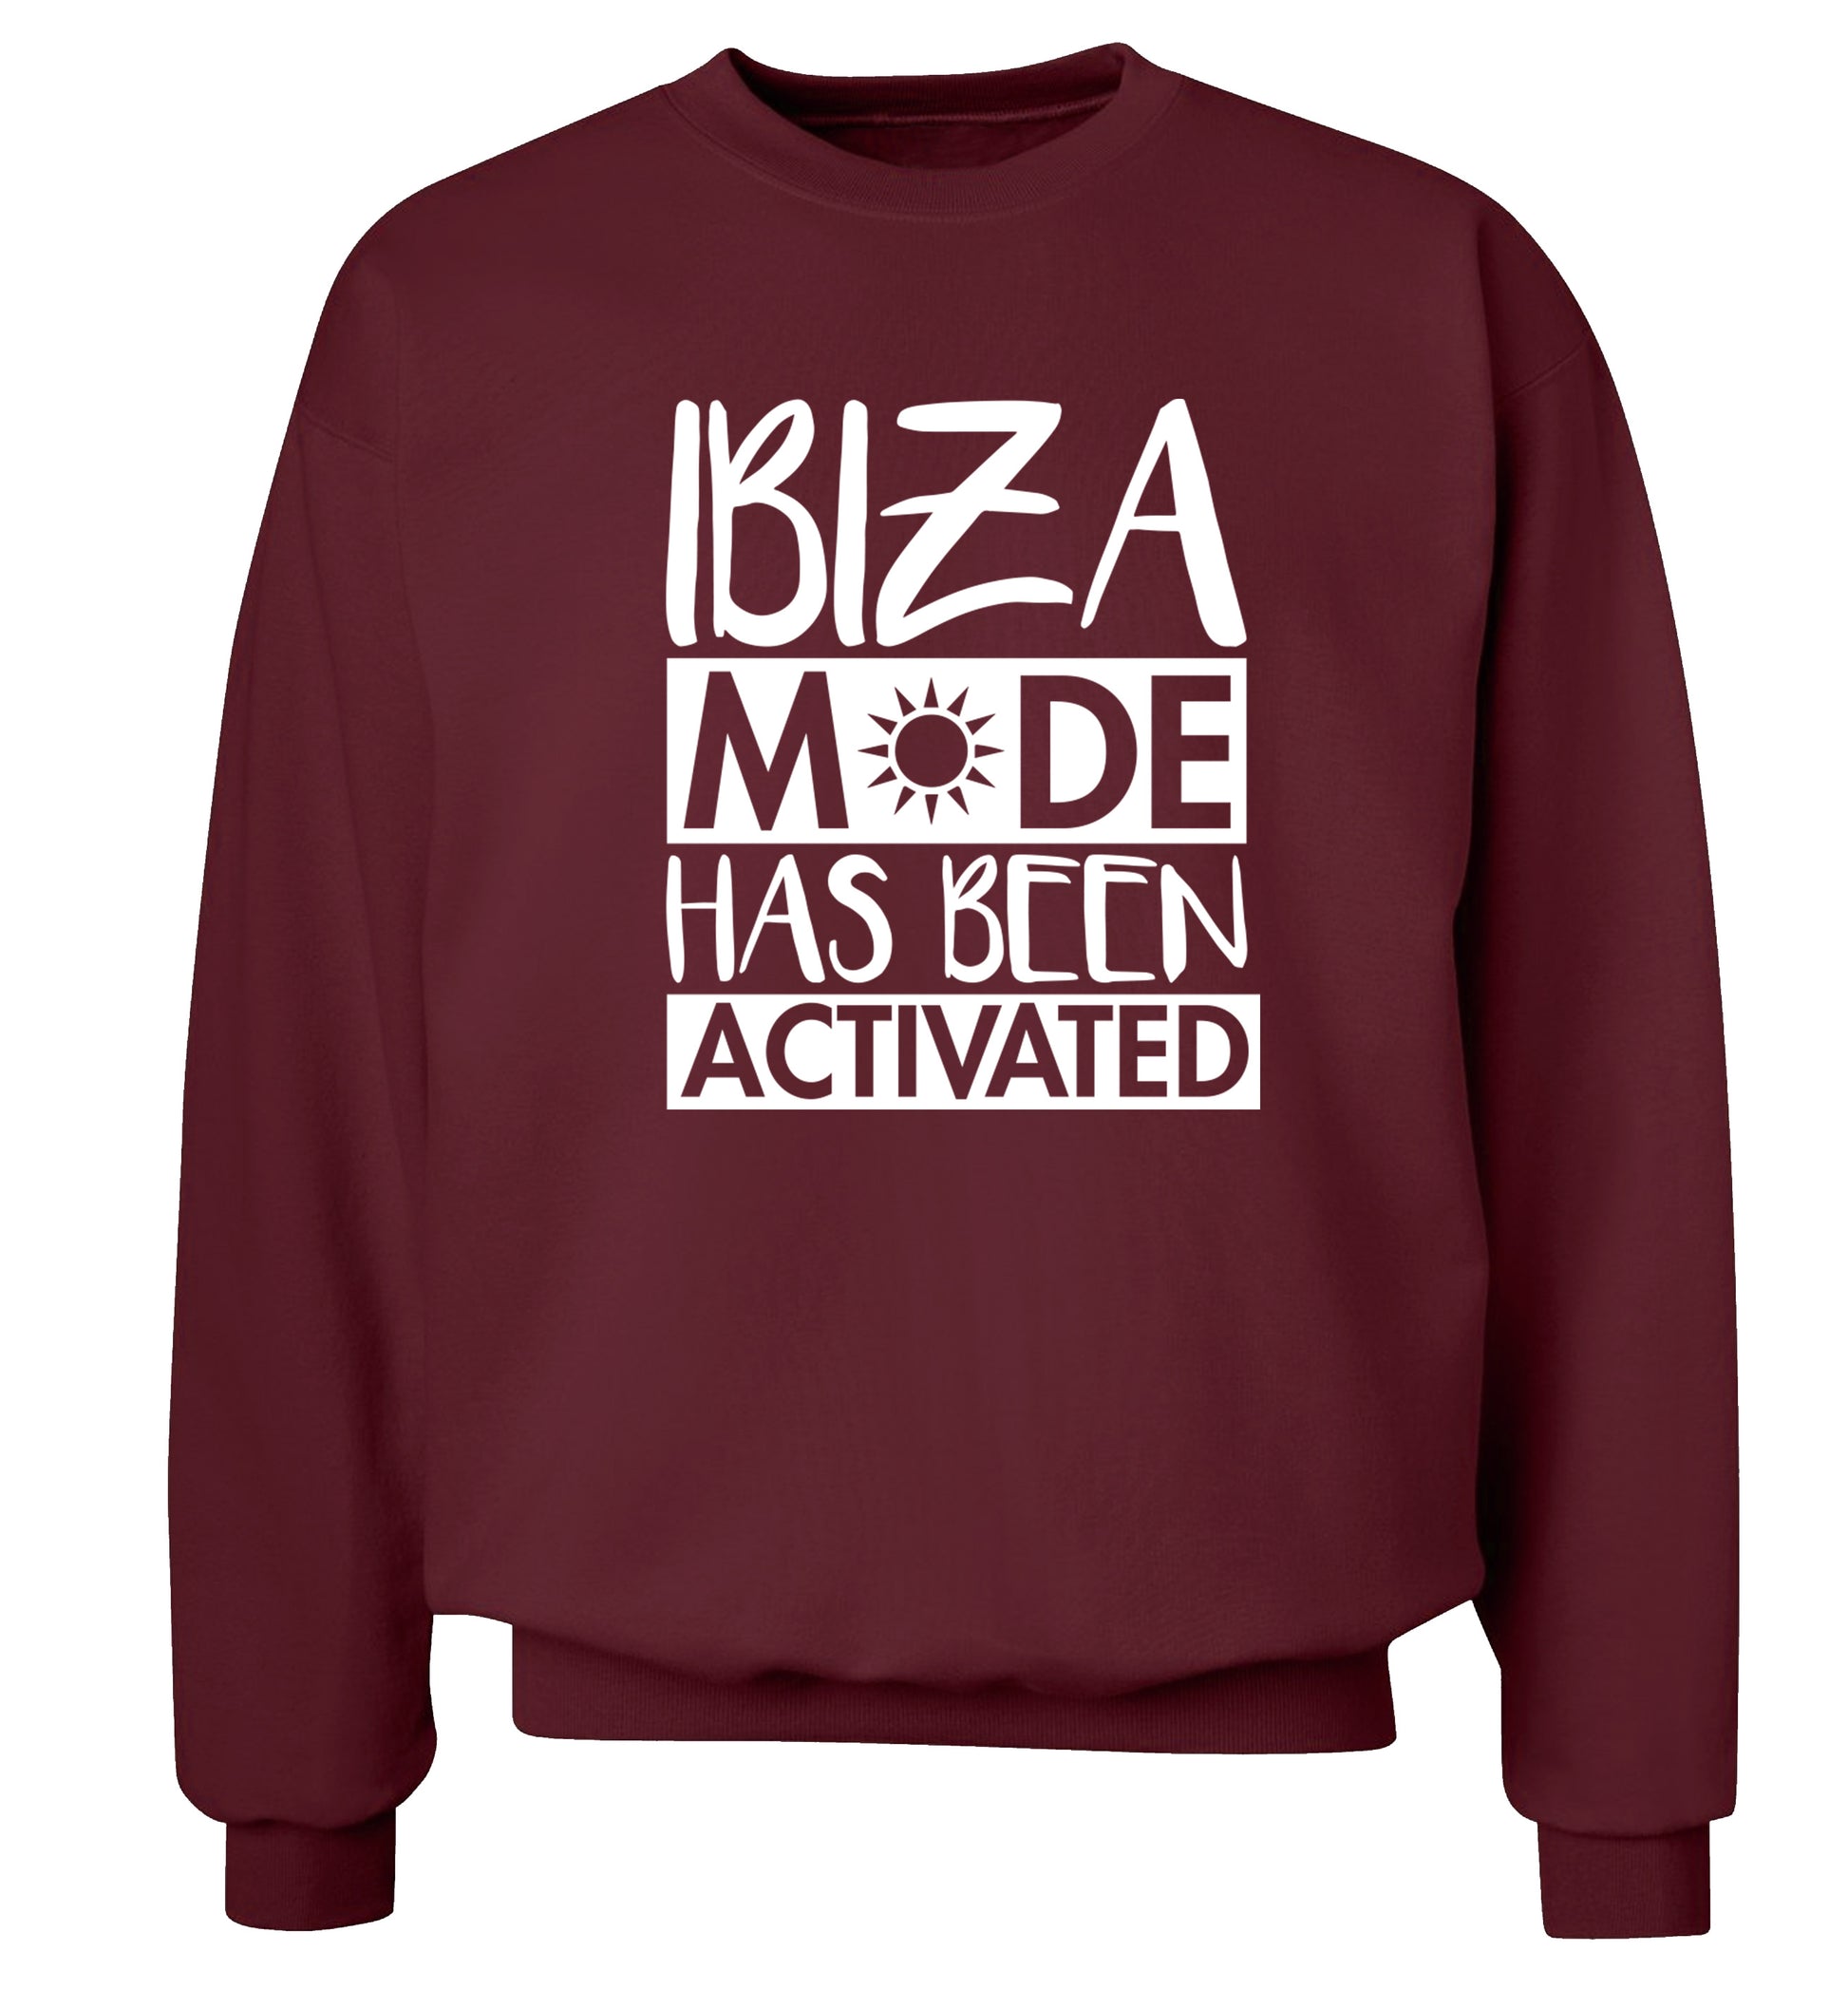 Ibiza mode has been activated Adult's unisex maroon Sweater 2XL